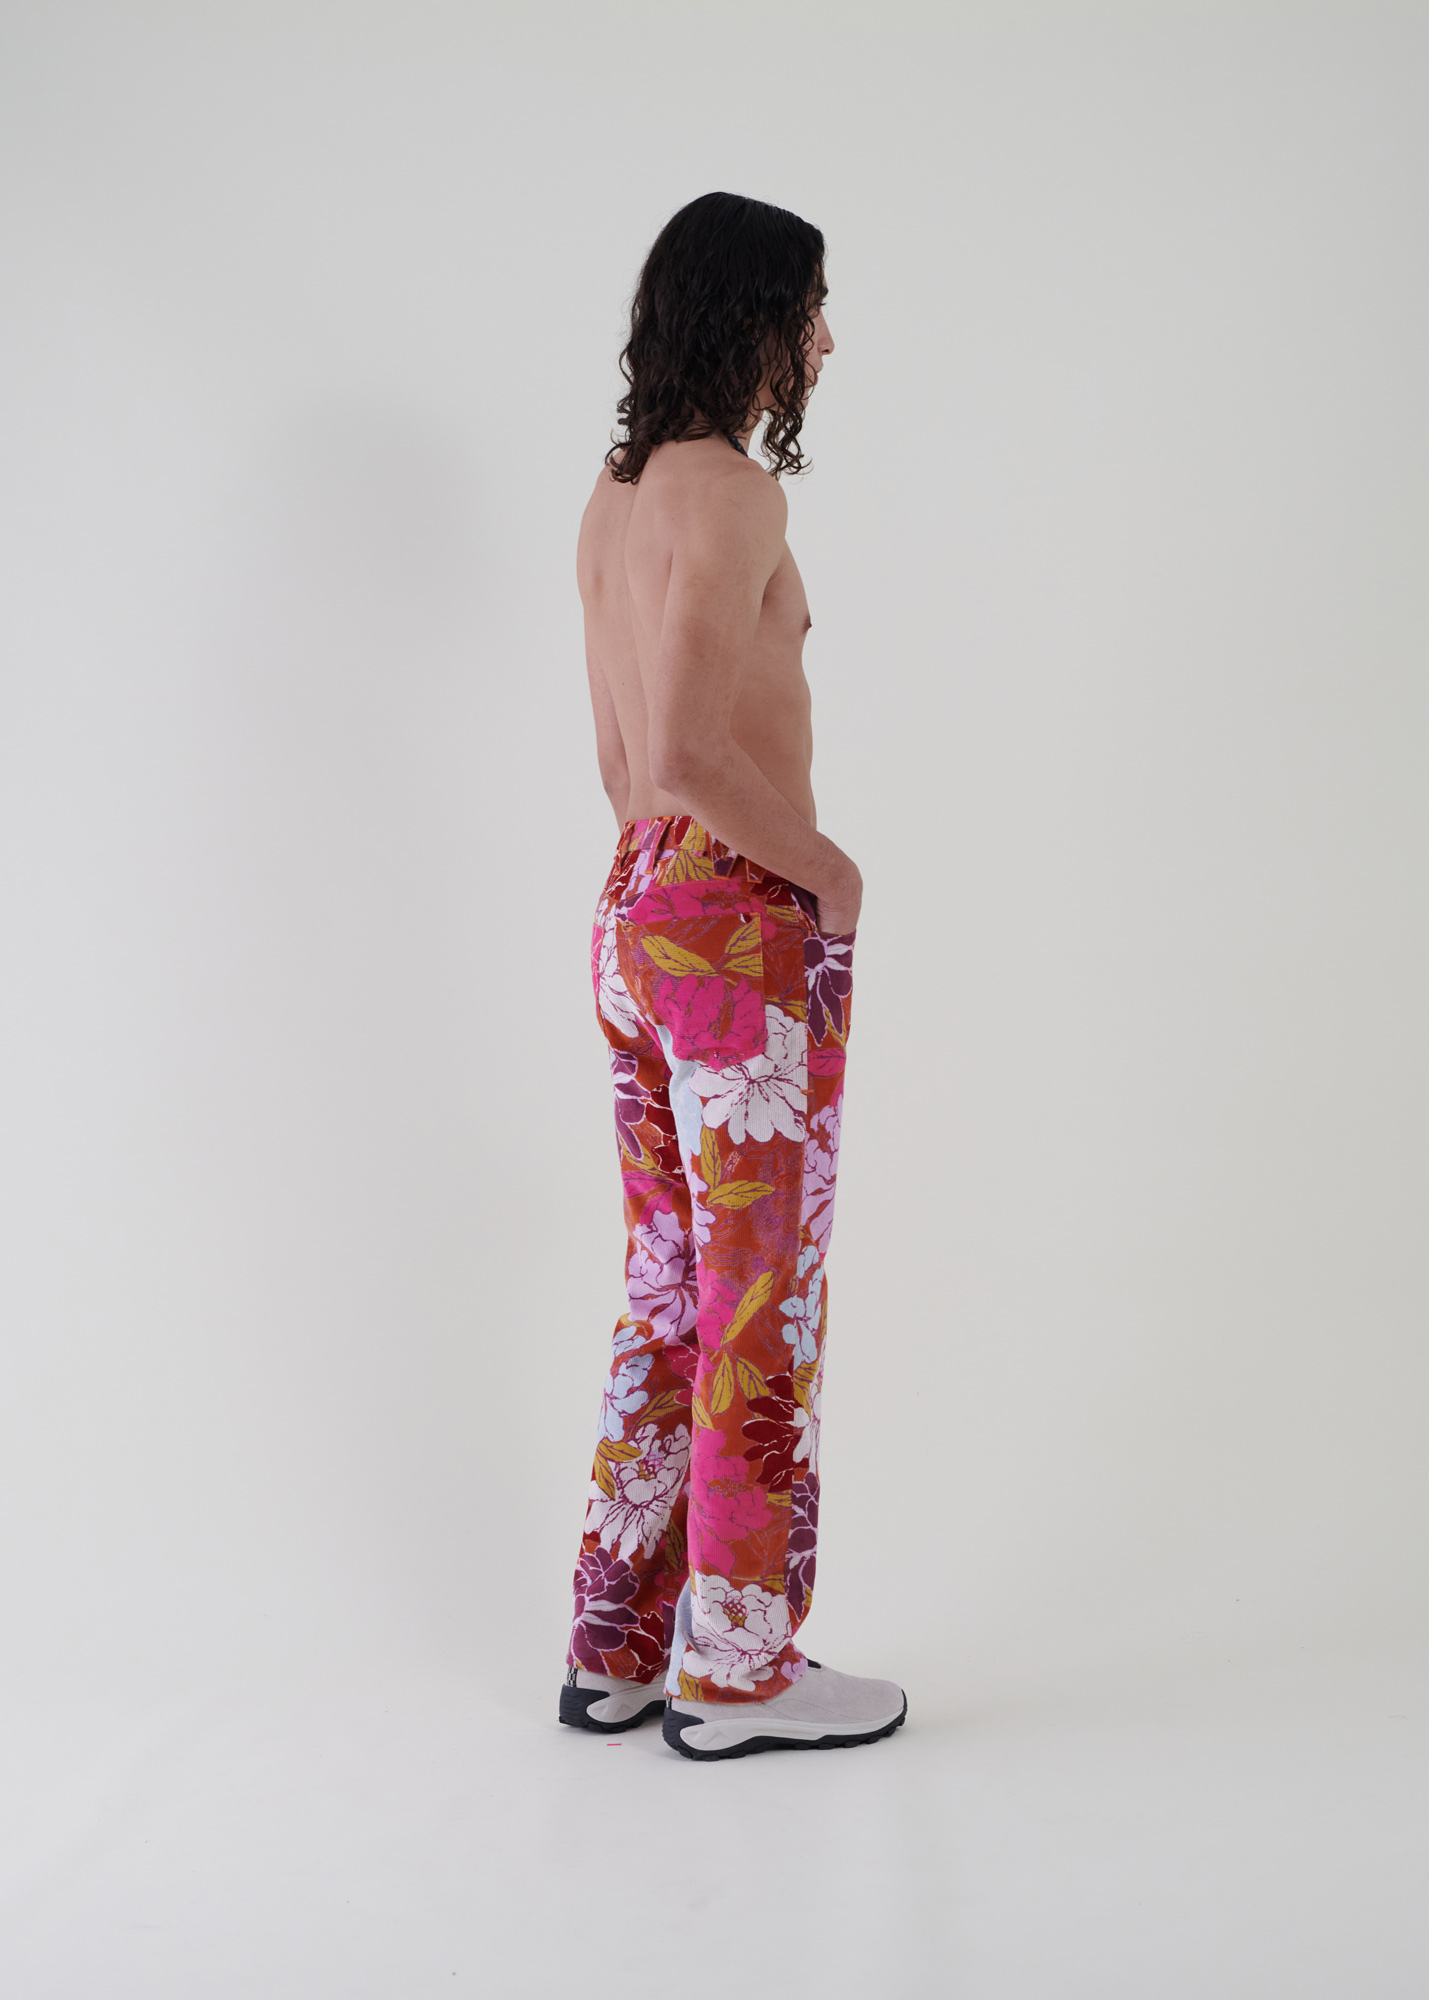 Sustainable fashion with upcycled cotton corduroy trousers from Aldwin Teva William